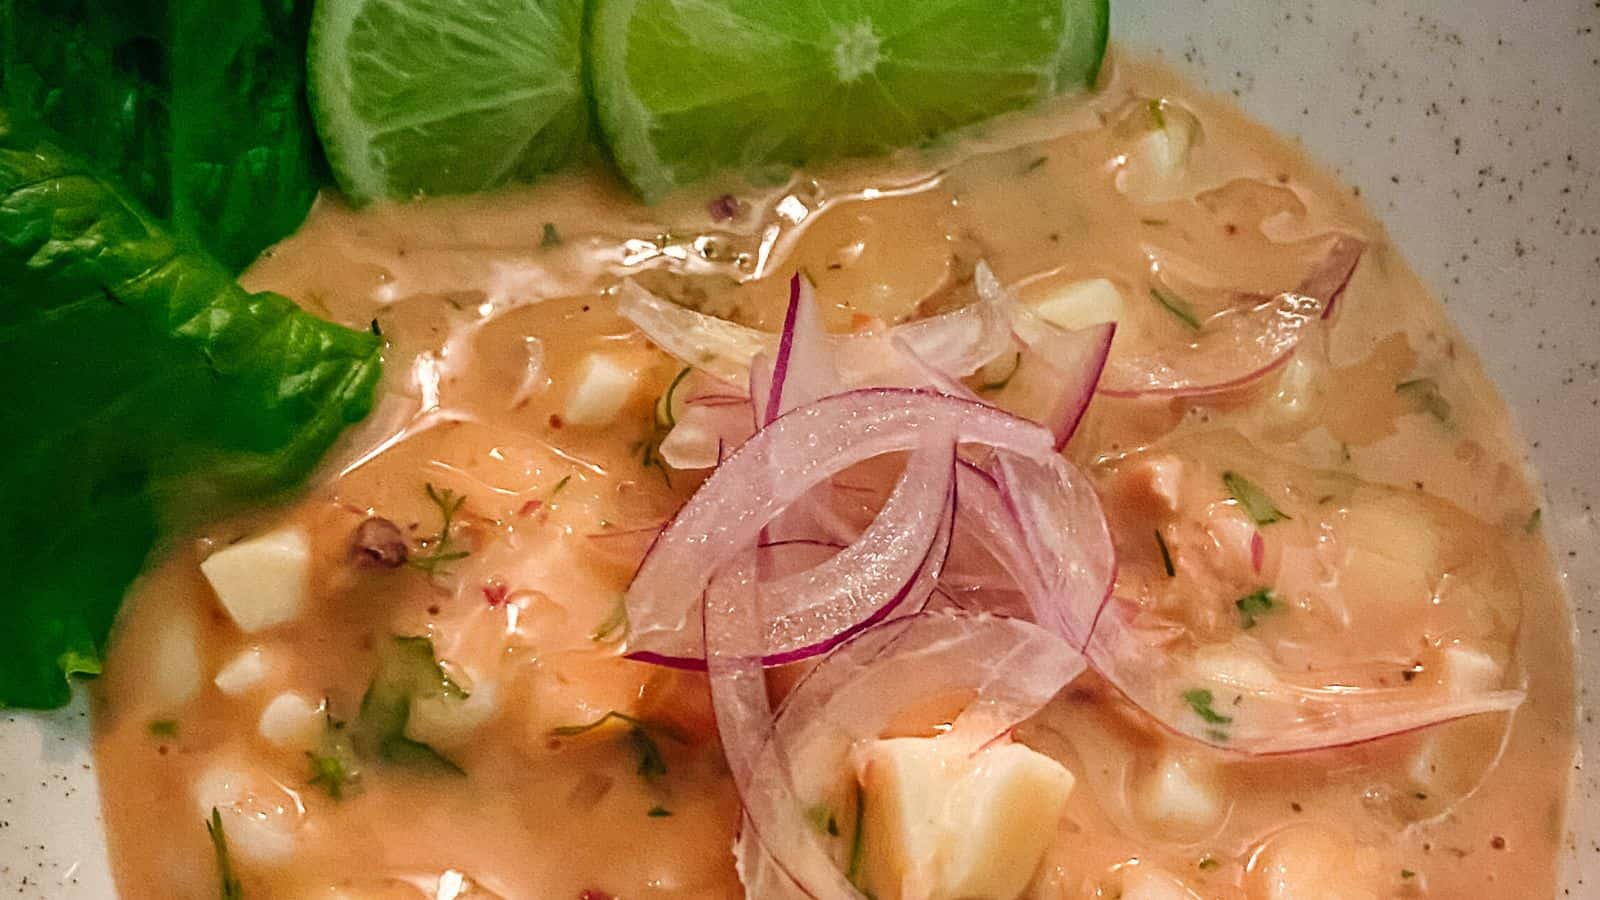 A bowl of soup with onions and limes on it.